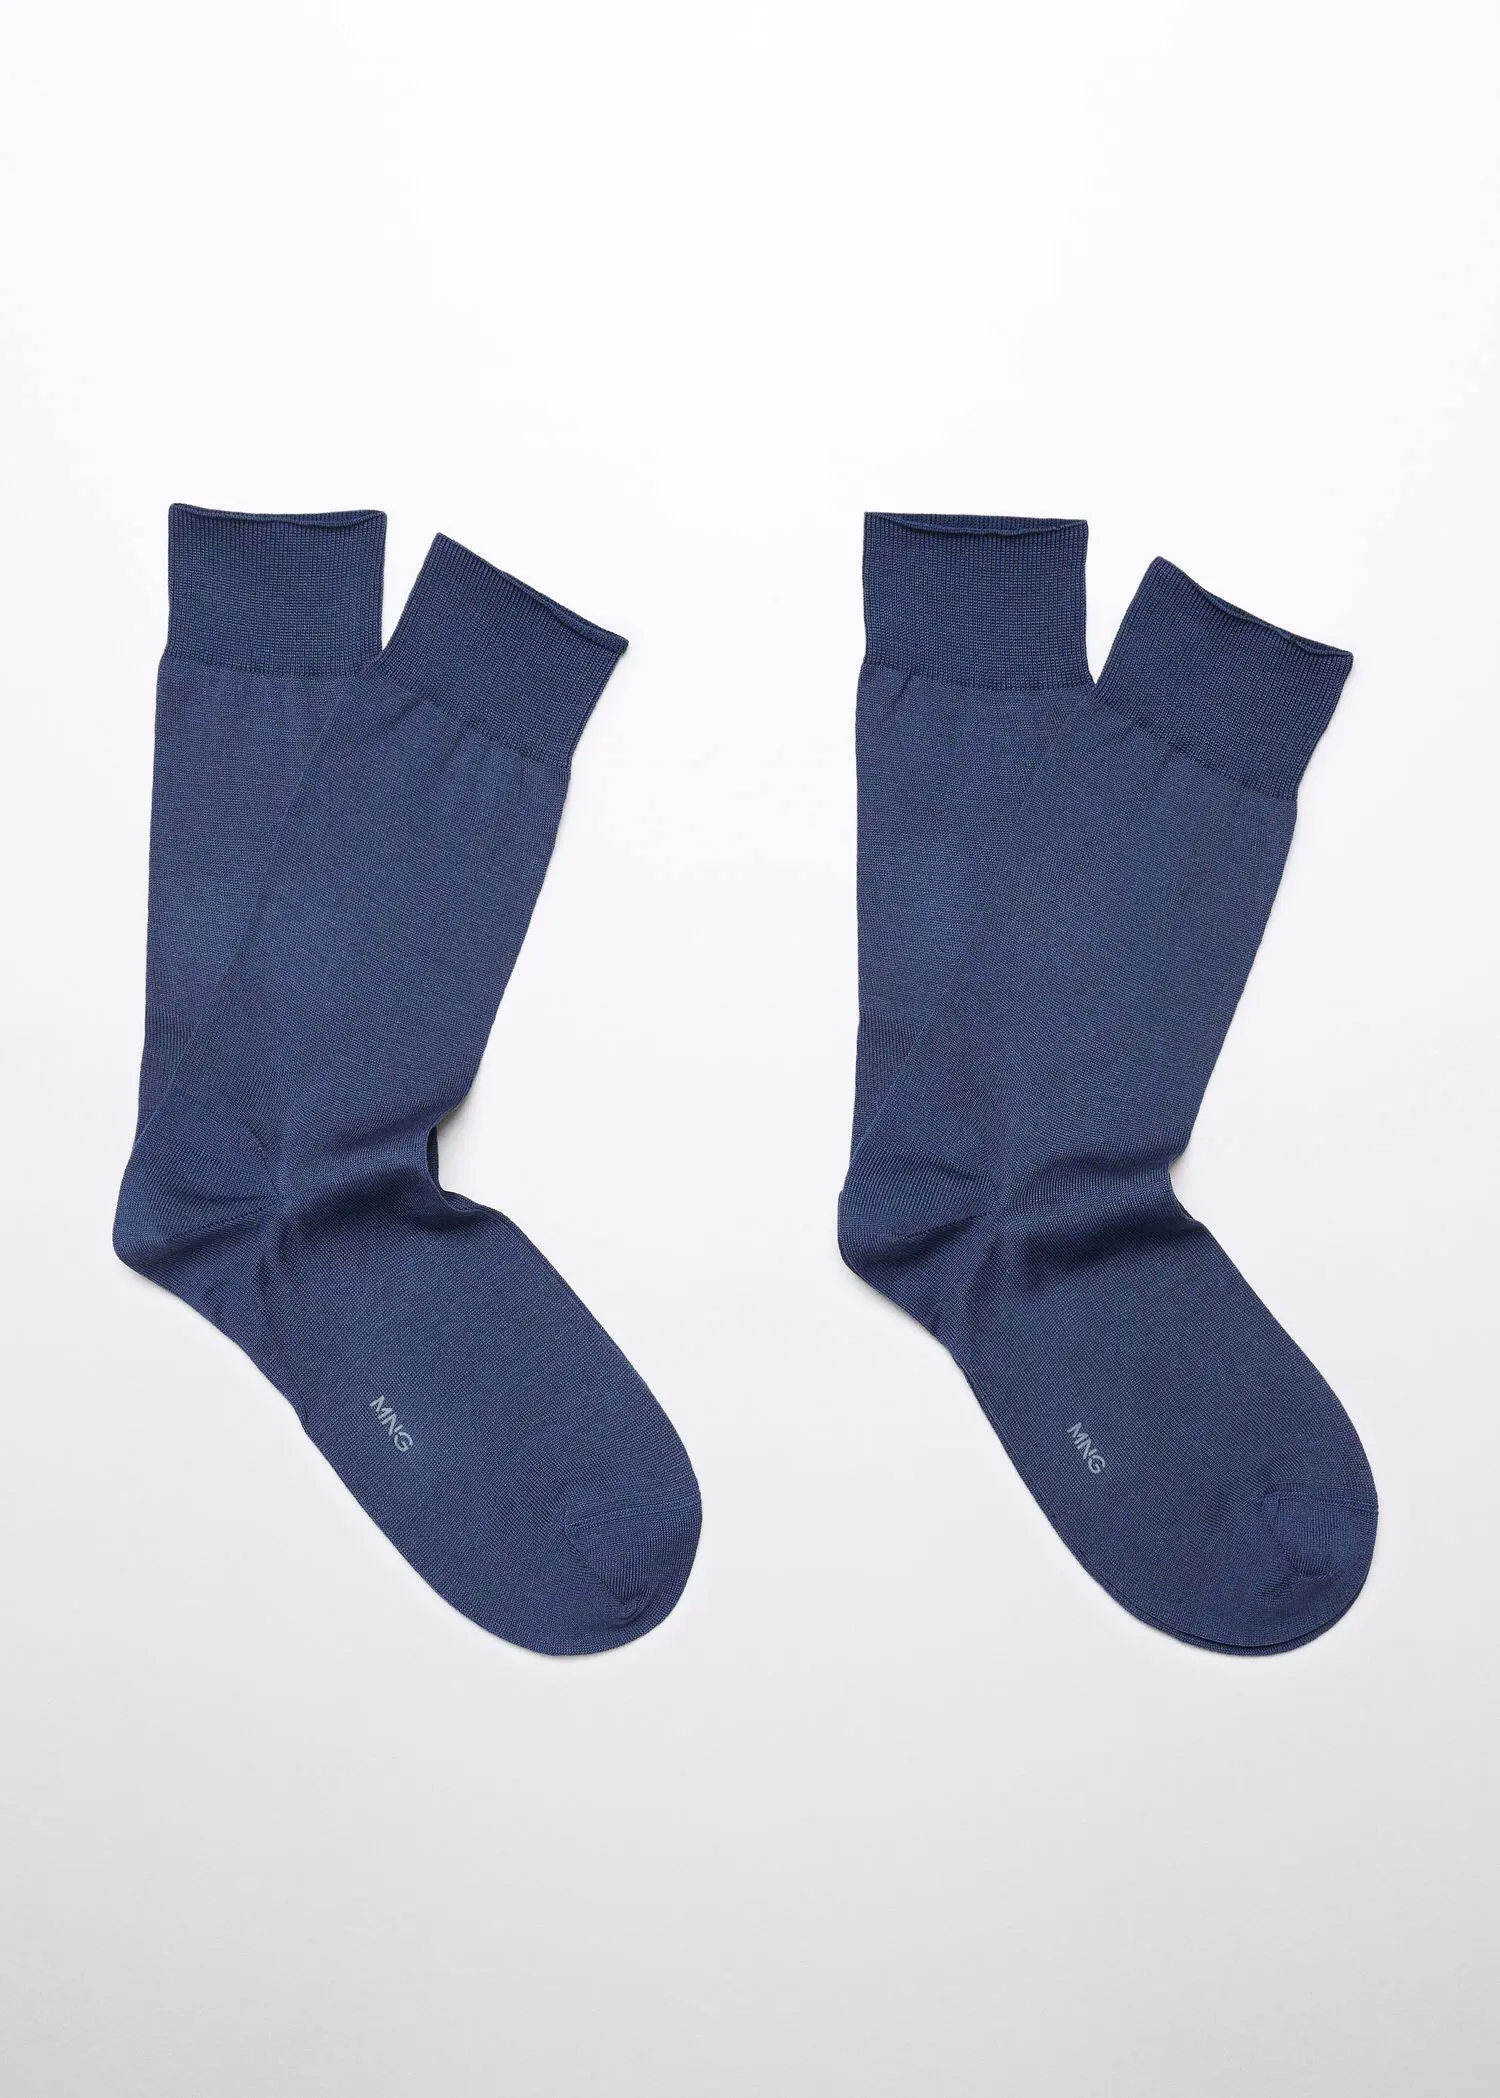 Mango Pack of 2 100% plain cotton socks. a pair of blue socks on a white background. 